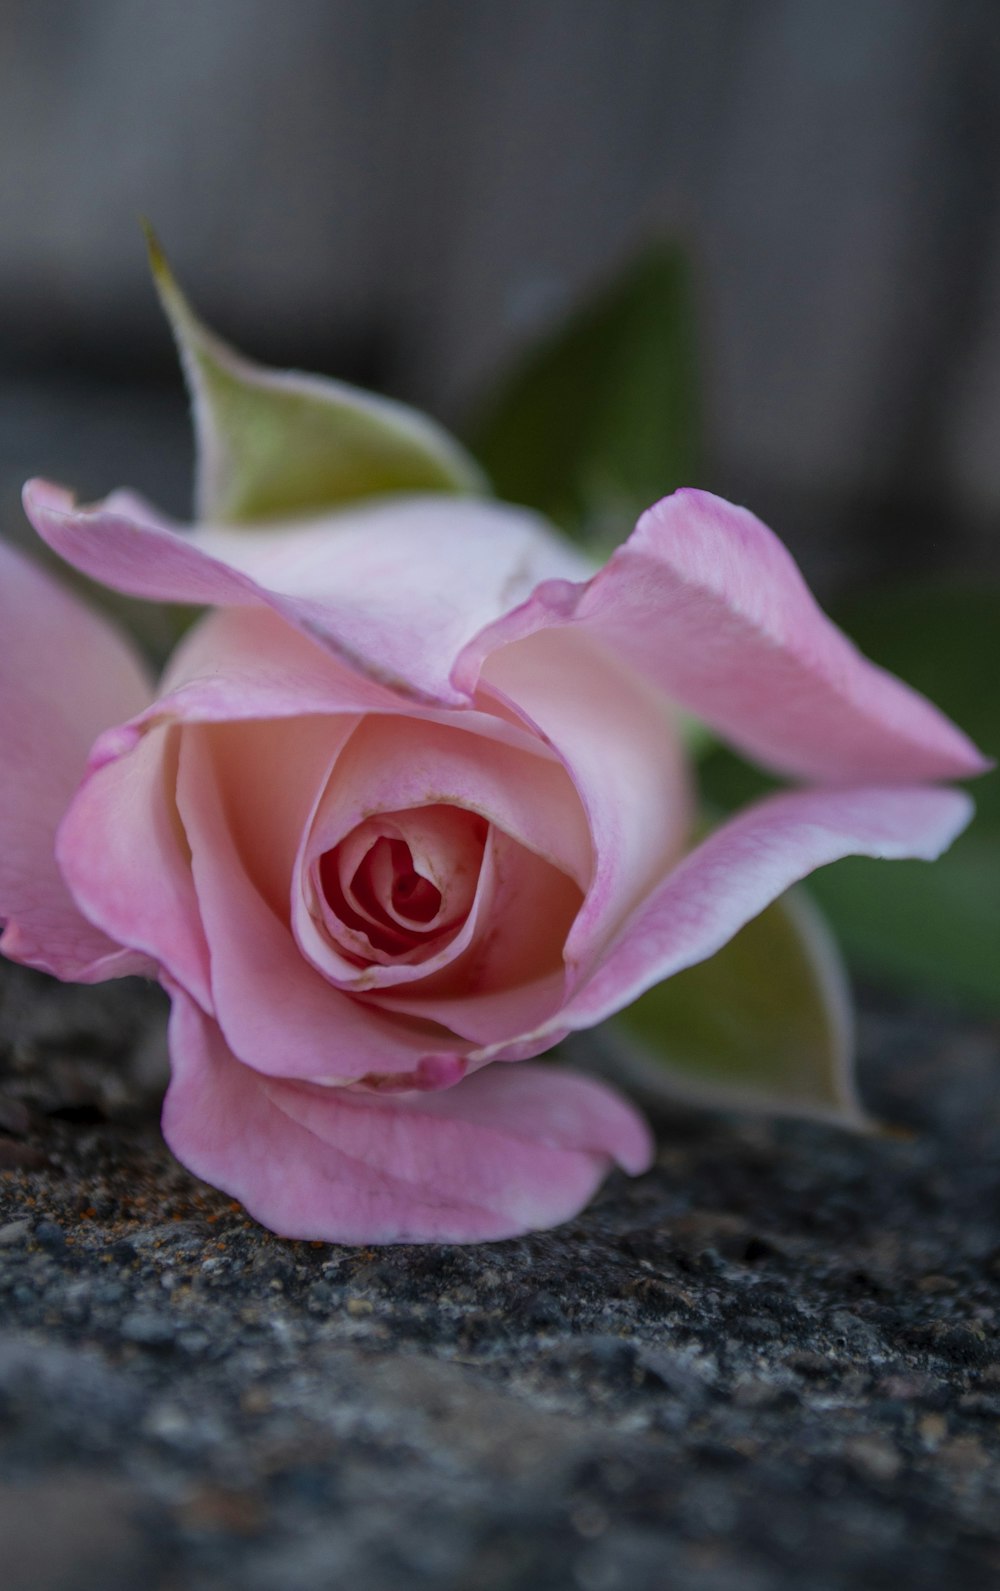 pink rose on brown wooden surface